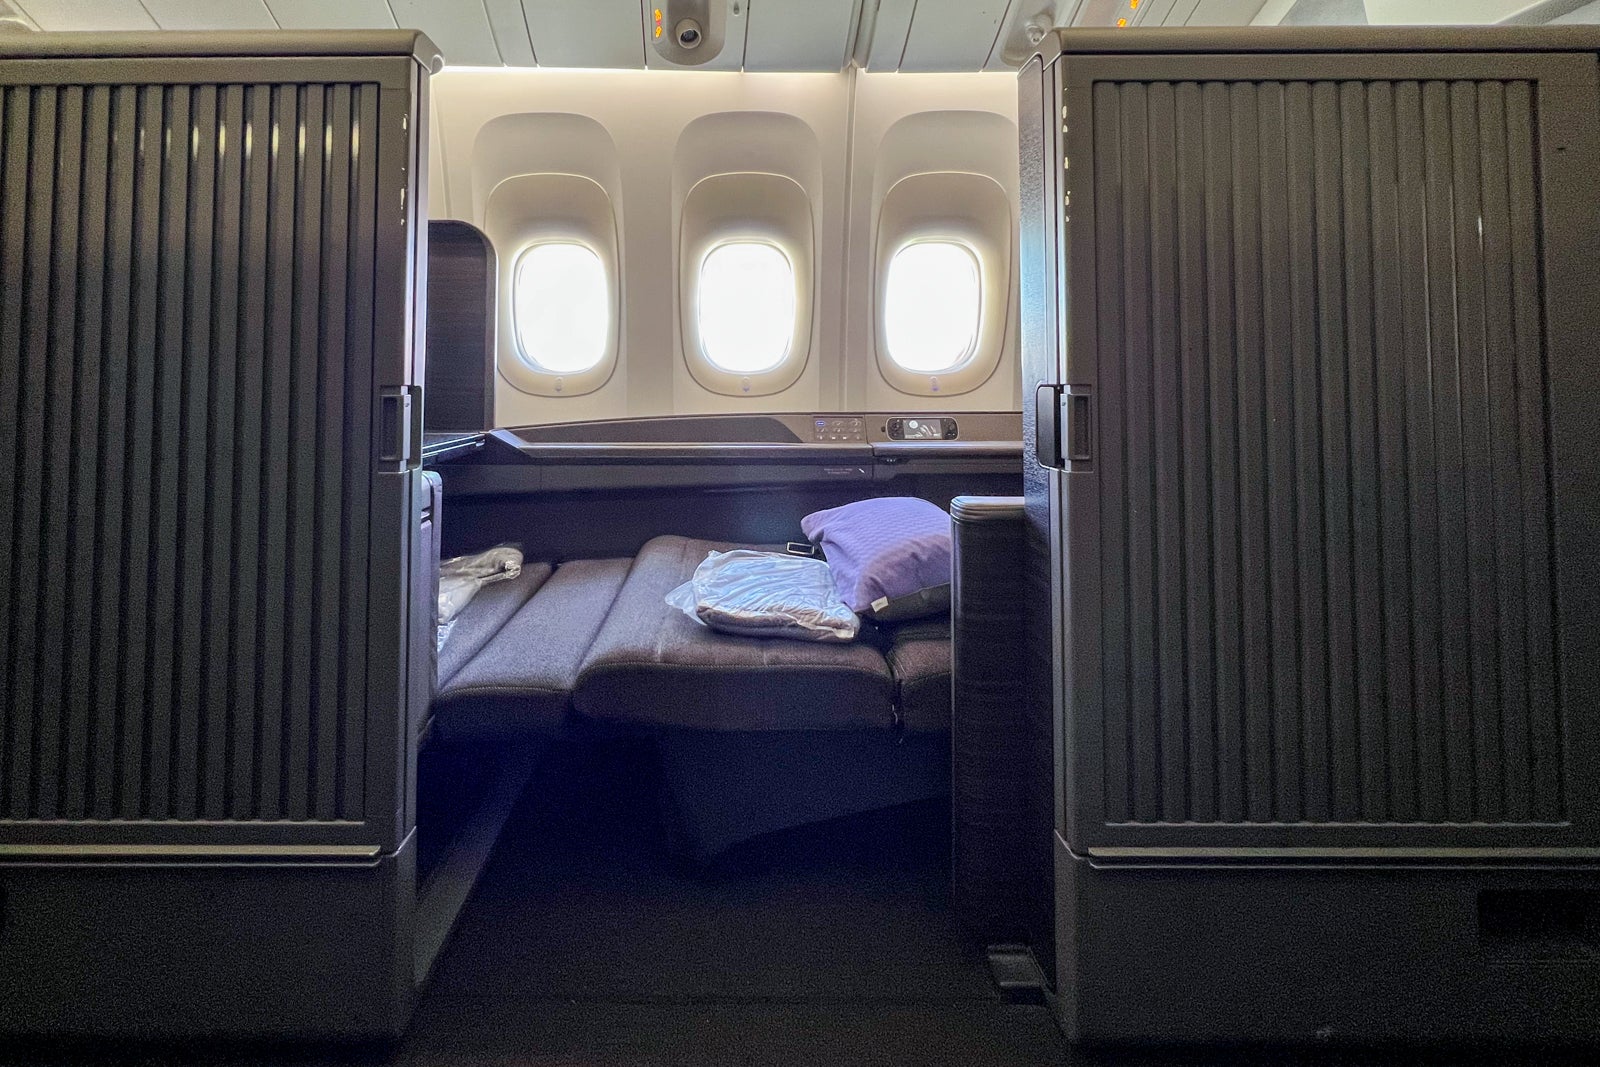 a mini-suite in an airplane's first class cabin shows the door open and seat reclined into the bed position